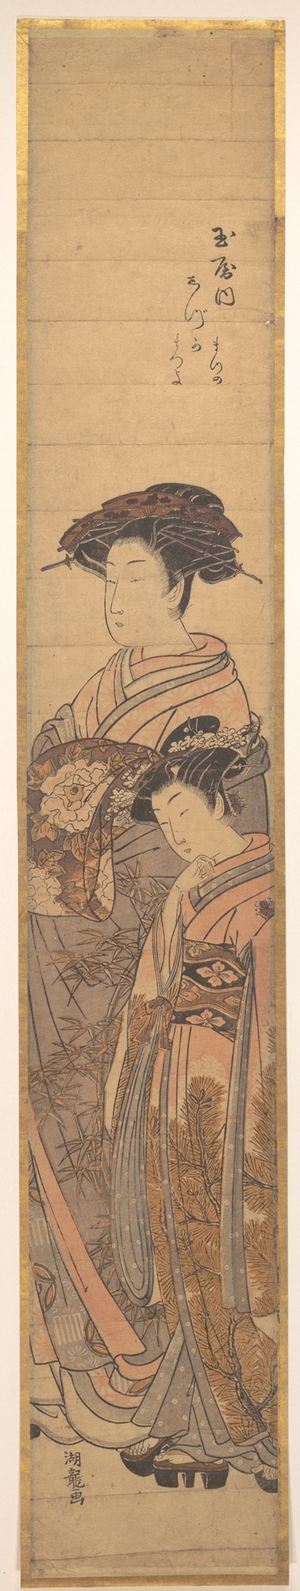 Isoda Koryusai: Oiran and Attendant out for a Stroll - Metropolitan Museum of Art